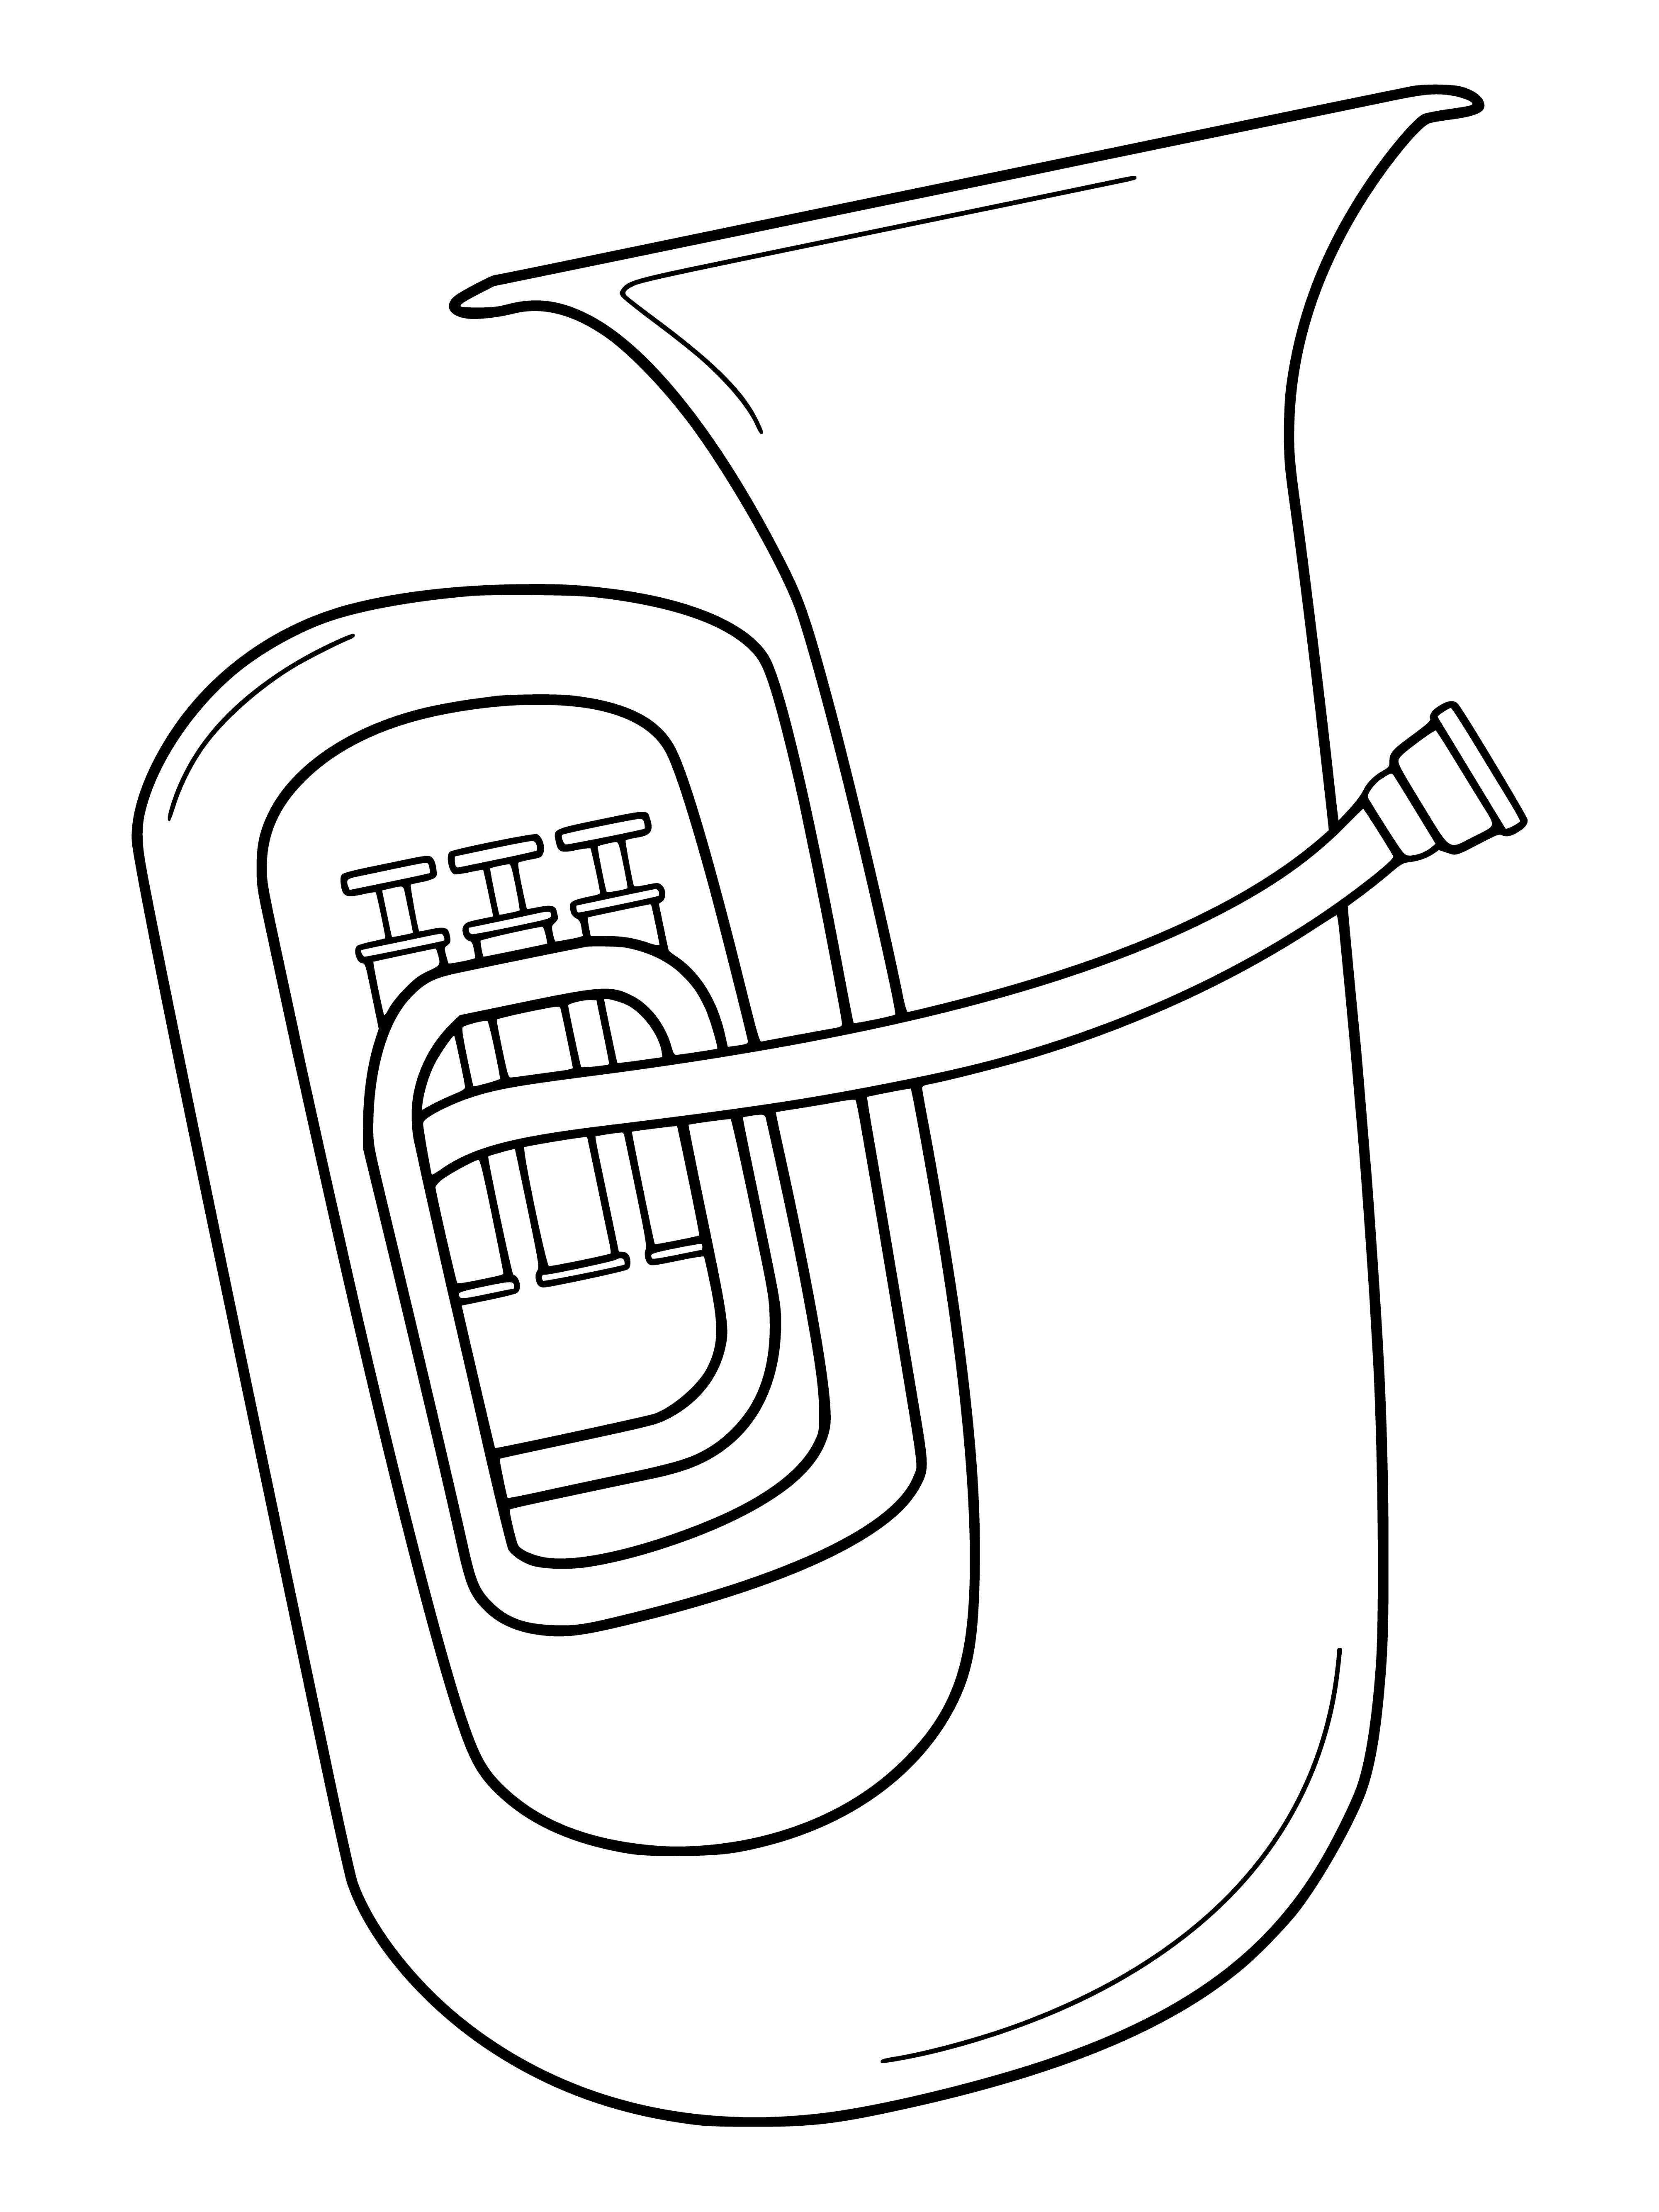 coloring page: The tuba is a large brass instrument with a bell & tube. Air vibrates the brass to create a low, deep sound when the player blows into it.